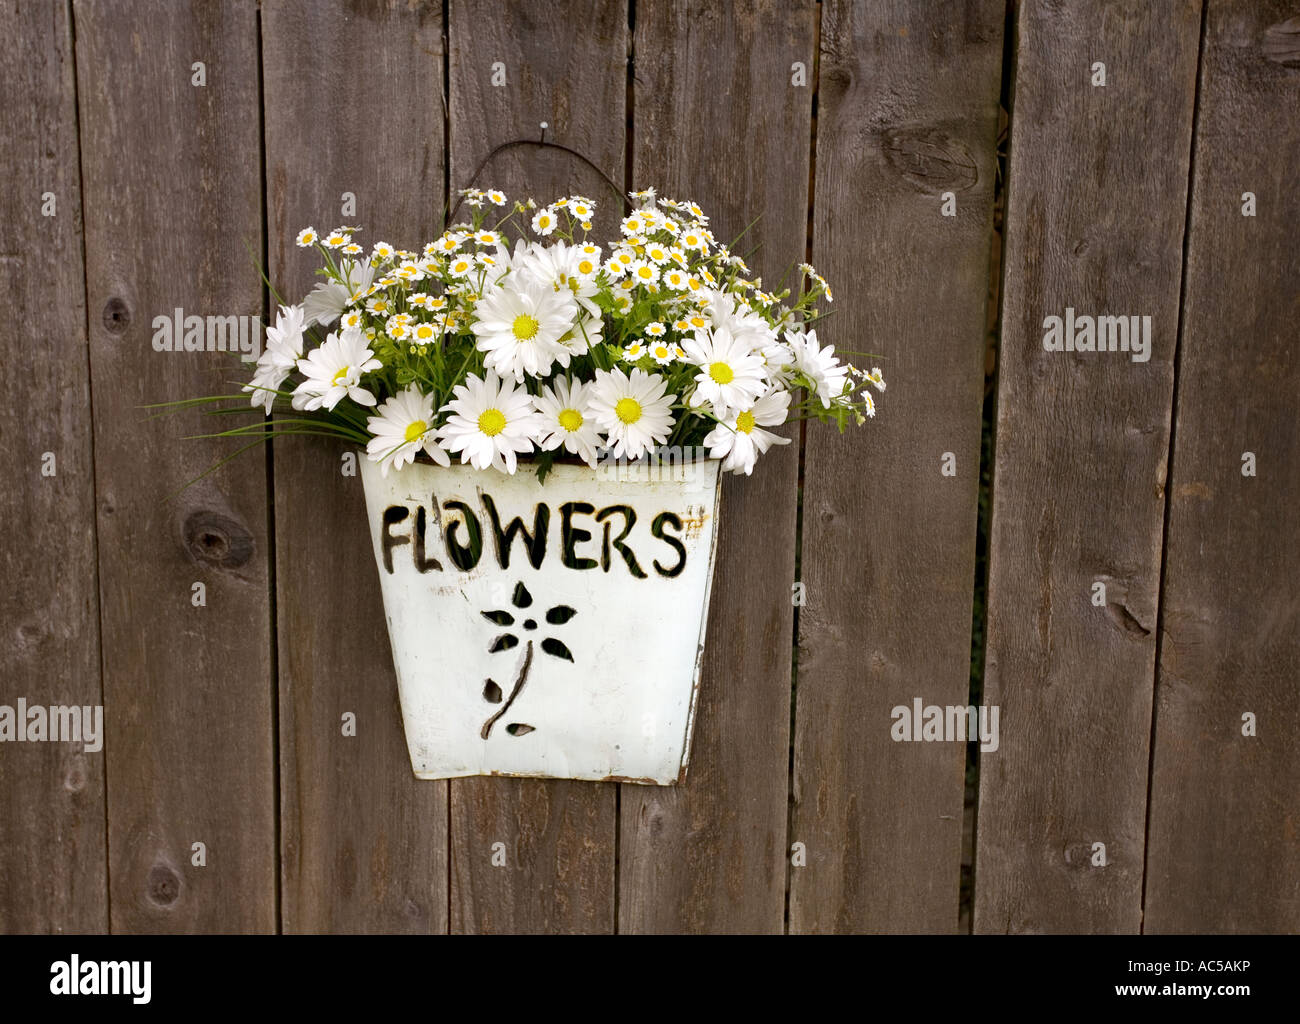 White gerbera daisies arranged in bucket vase hanging on a rustic fence Stock Photo